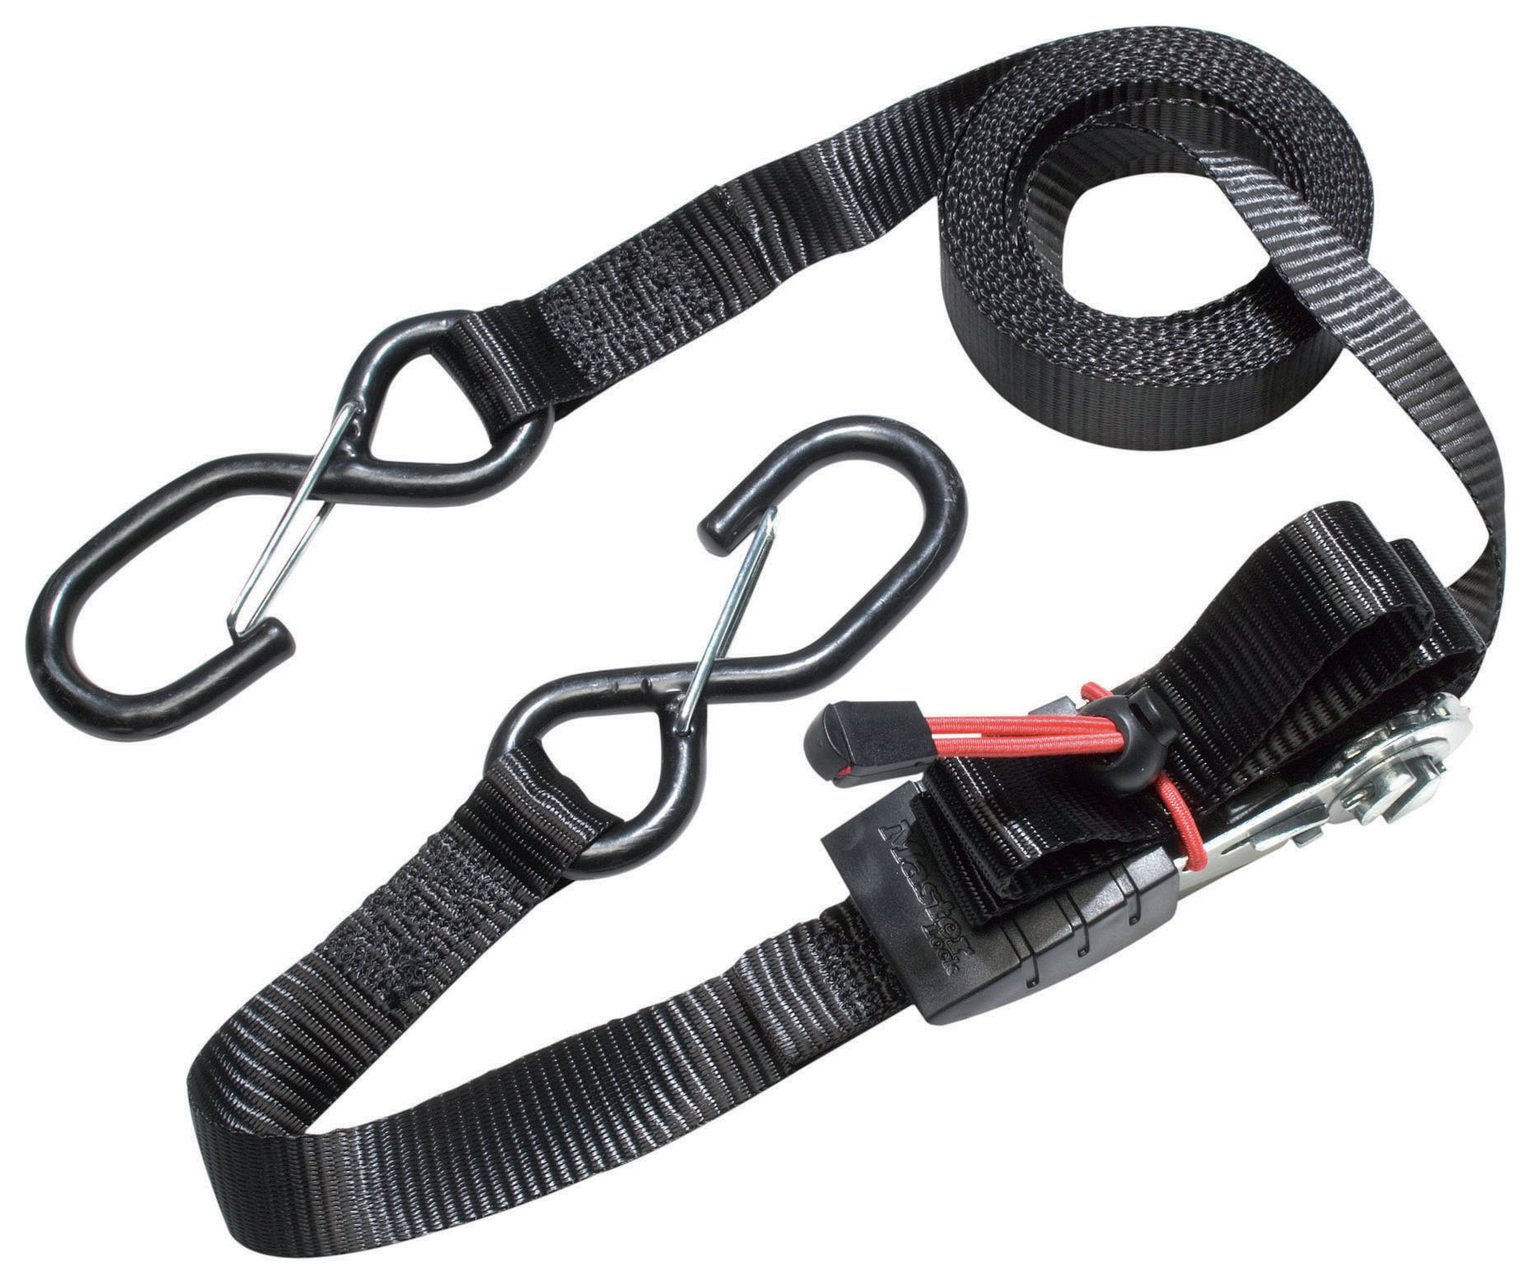 Master Lock Ratchet Tie Down Pack review